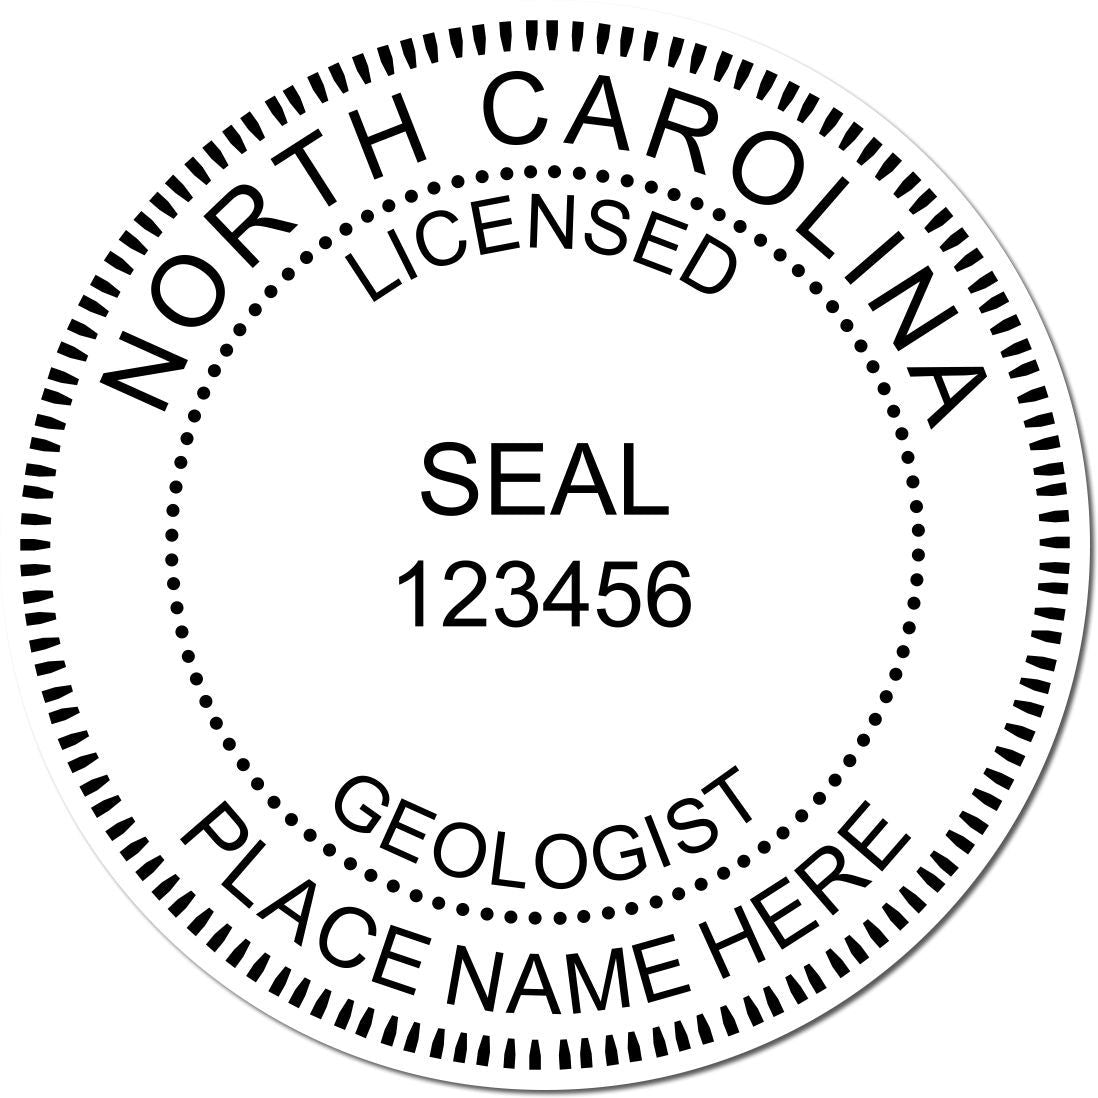 An alternative view of the Premium MaxLight Pre-Inked North Carolina Geology Stamp stamped on a sheet of paper showing the image in use